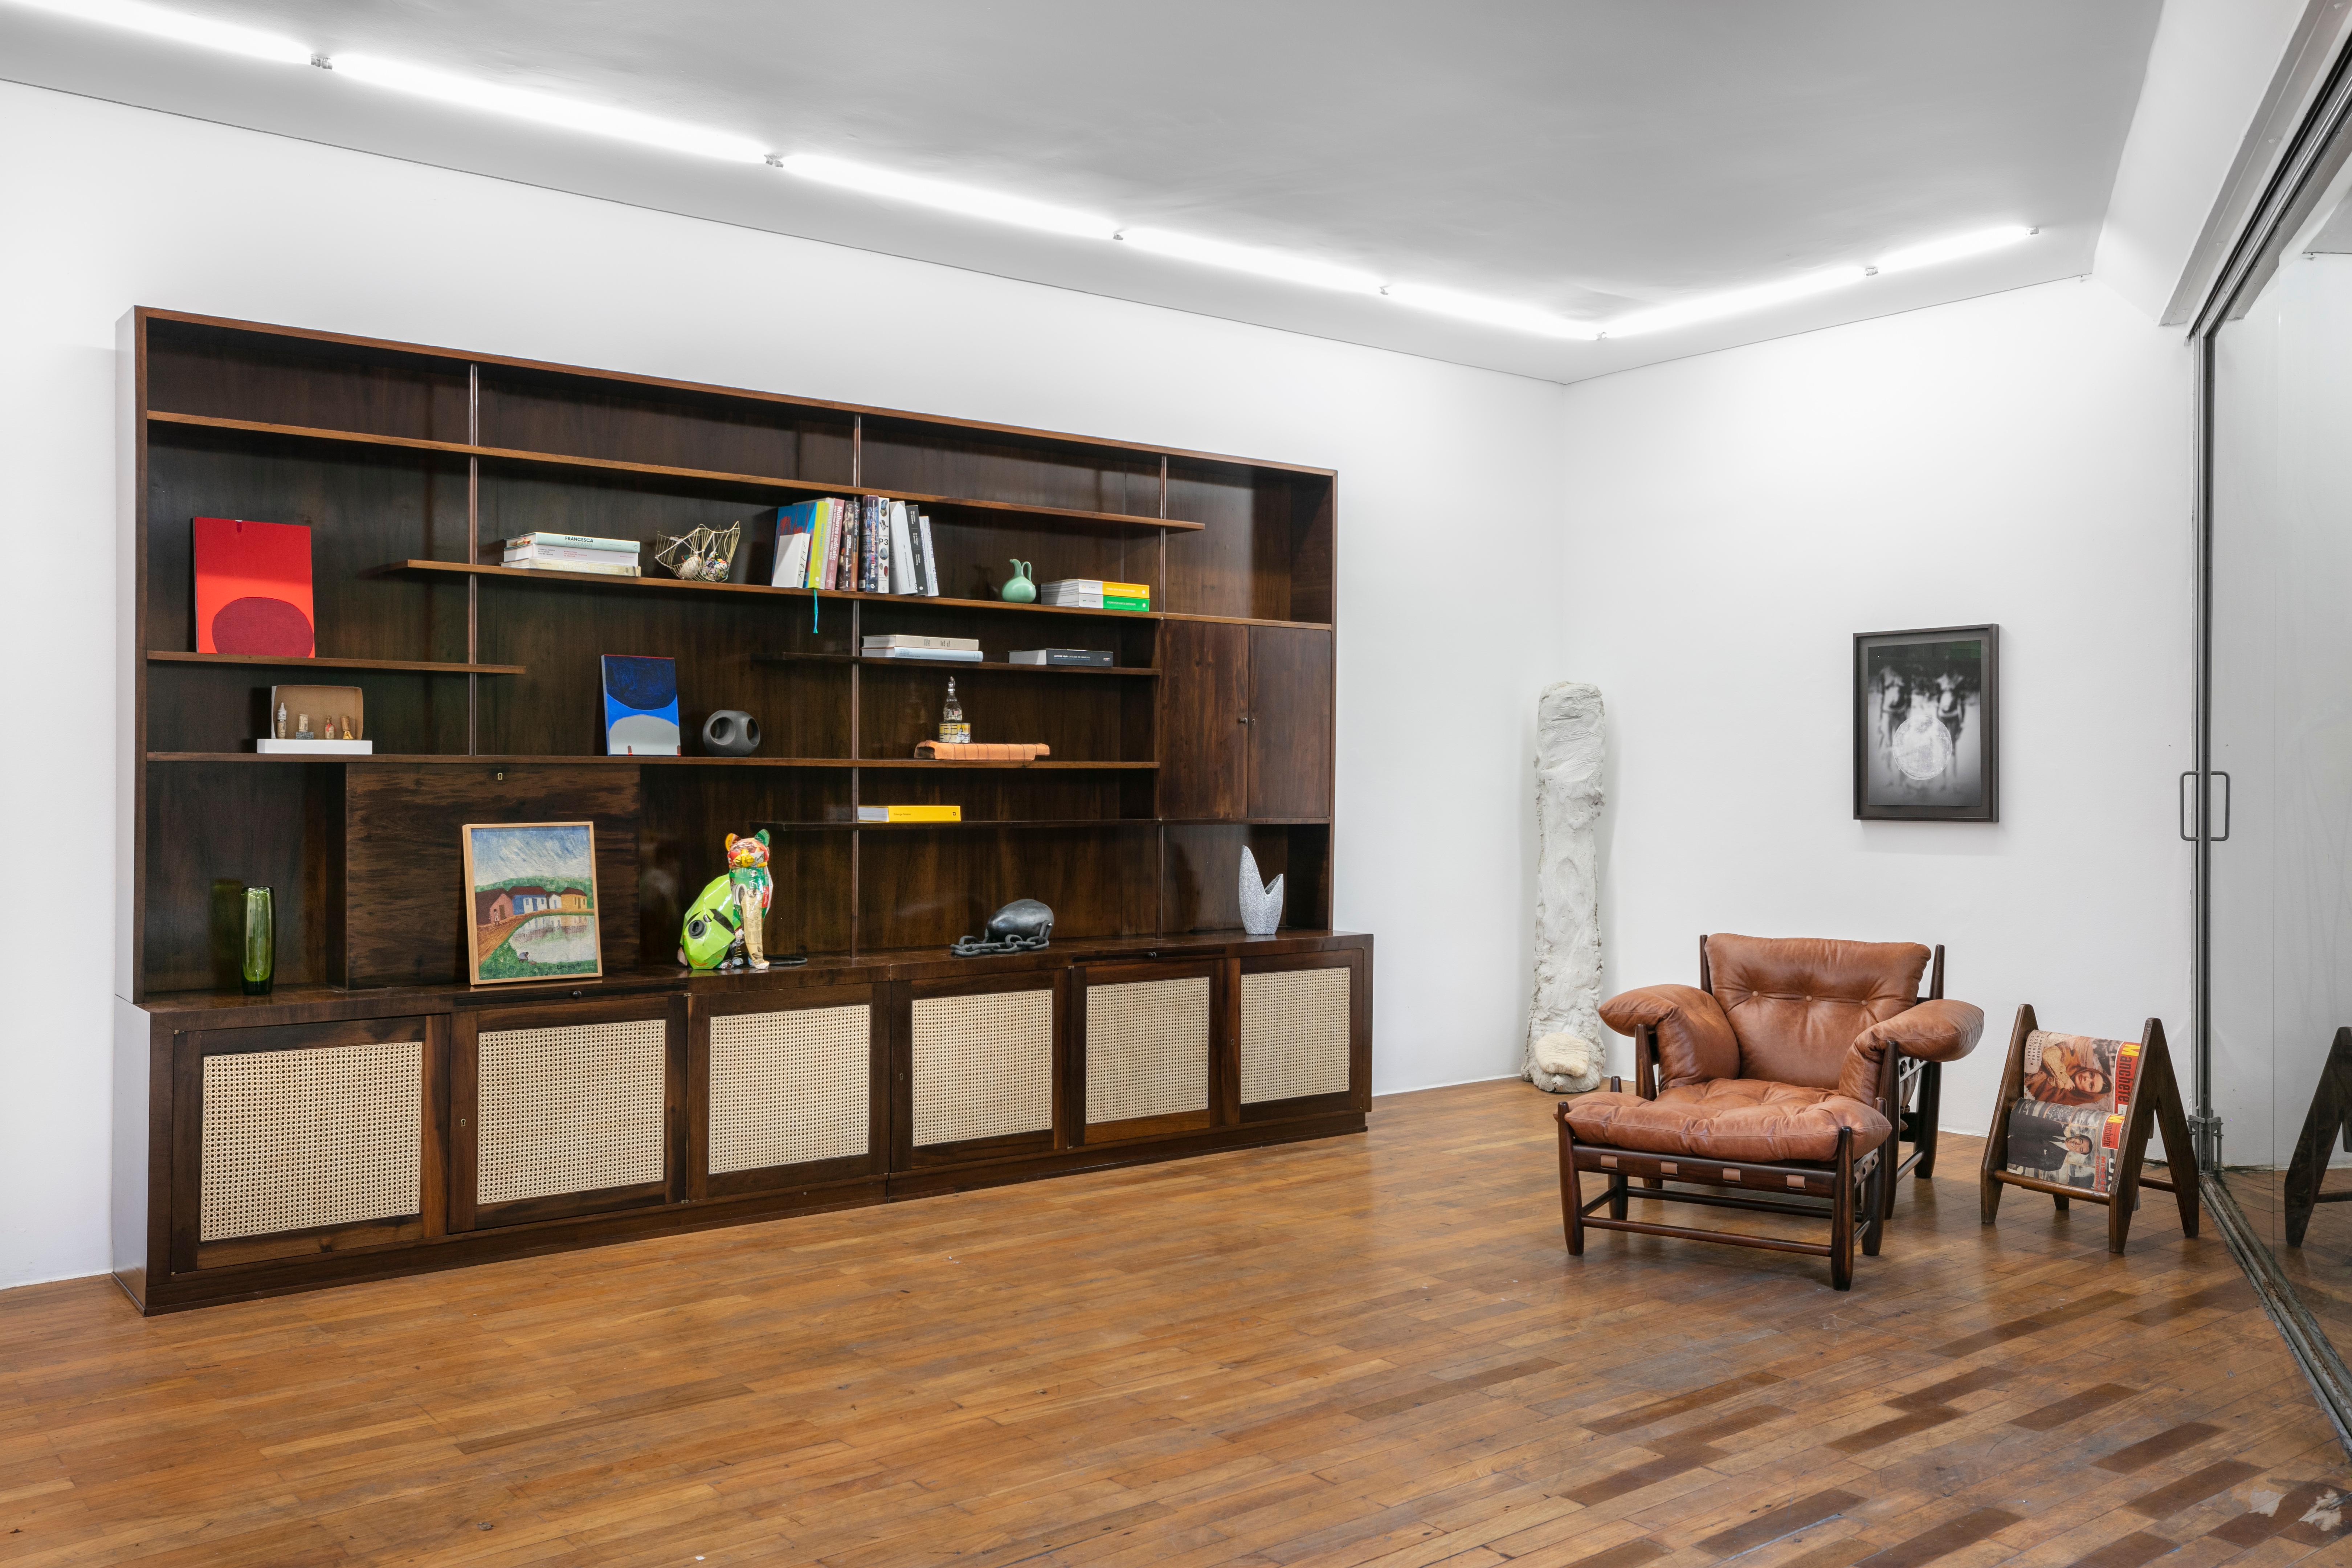 A particular characteristic in Brazilian mid-century furniture making was the practice of entire furnishing houses in exchange for a special commission. Inside these interiors, there were well-known pieces produced by the most prominent